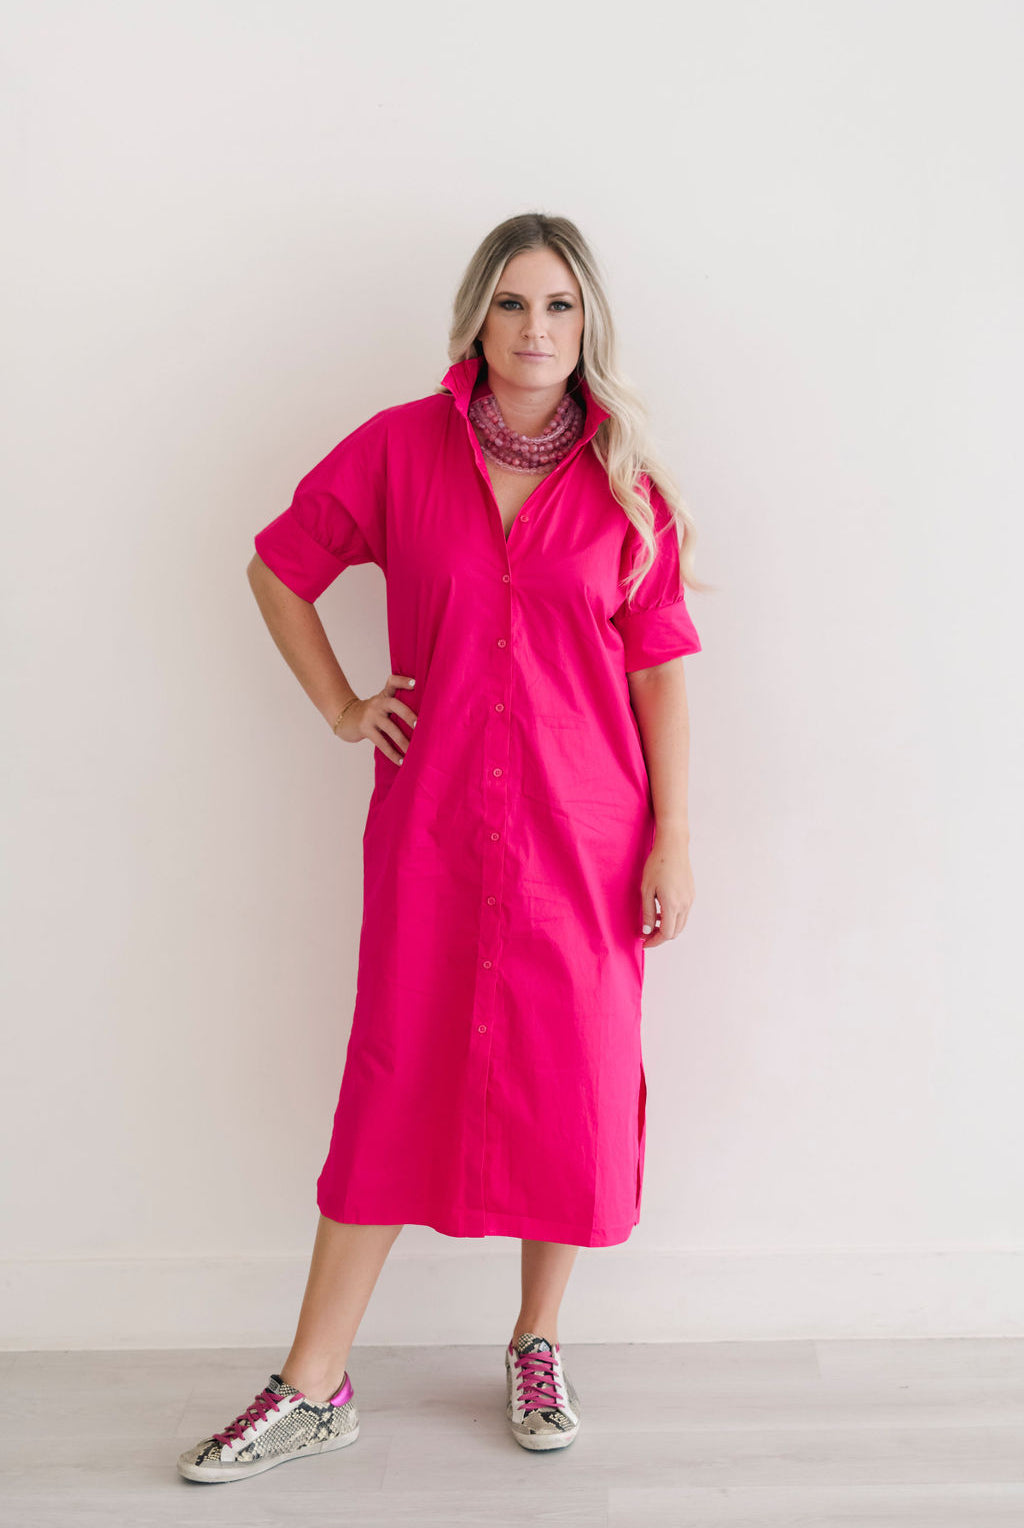 Button down shirt dress in hot pink.  Ruffle collar with elbow length sleeves.